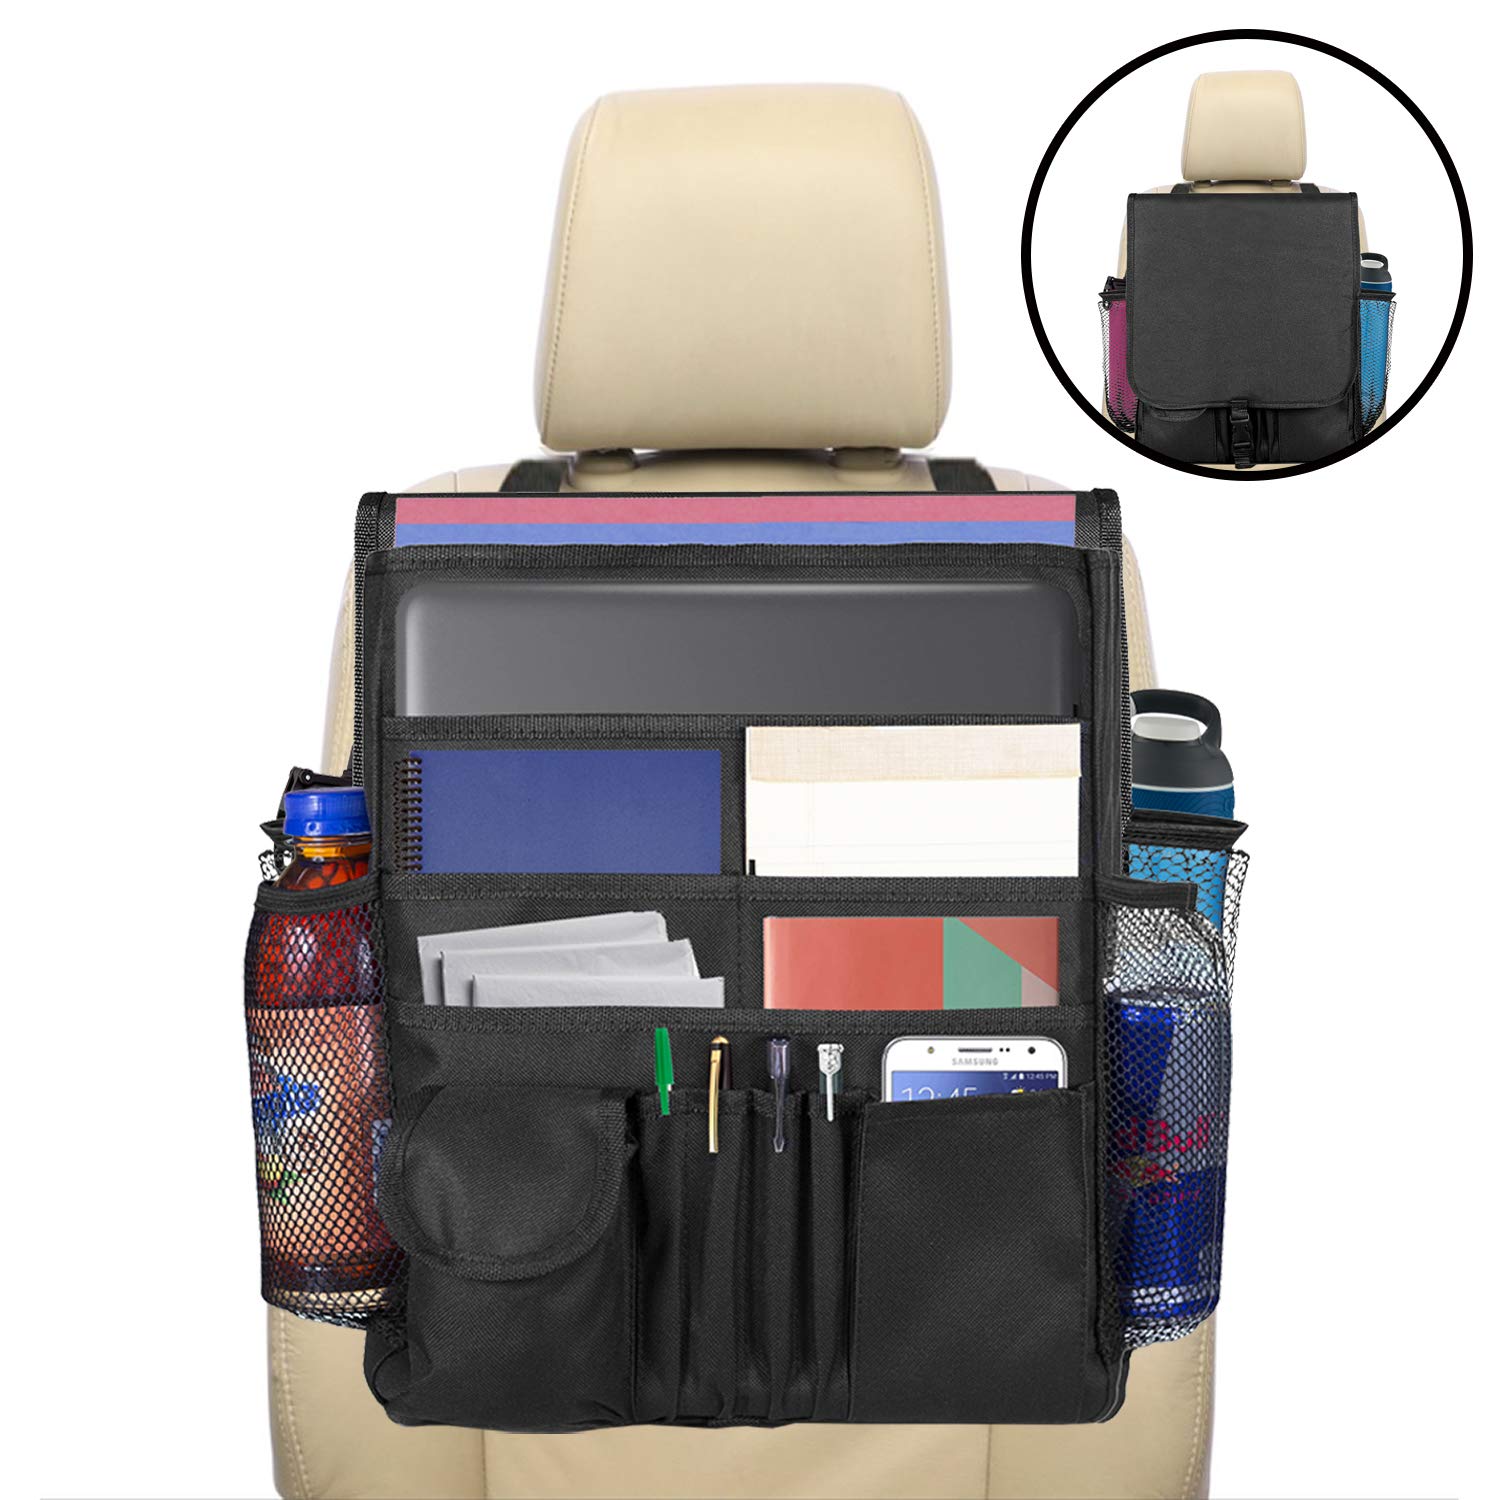 lebogner Car Organizer, Front Seat Storage Organizer, Small Driver Accessories Travel Car Office Organizer, Backseat Organizer with Large Secured Pockets, Car Seat Caddy, for Adults and Kids - image 1 of 6